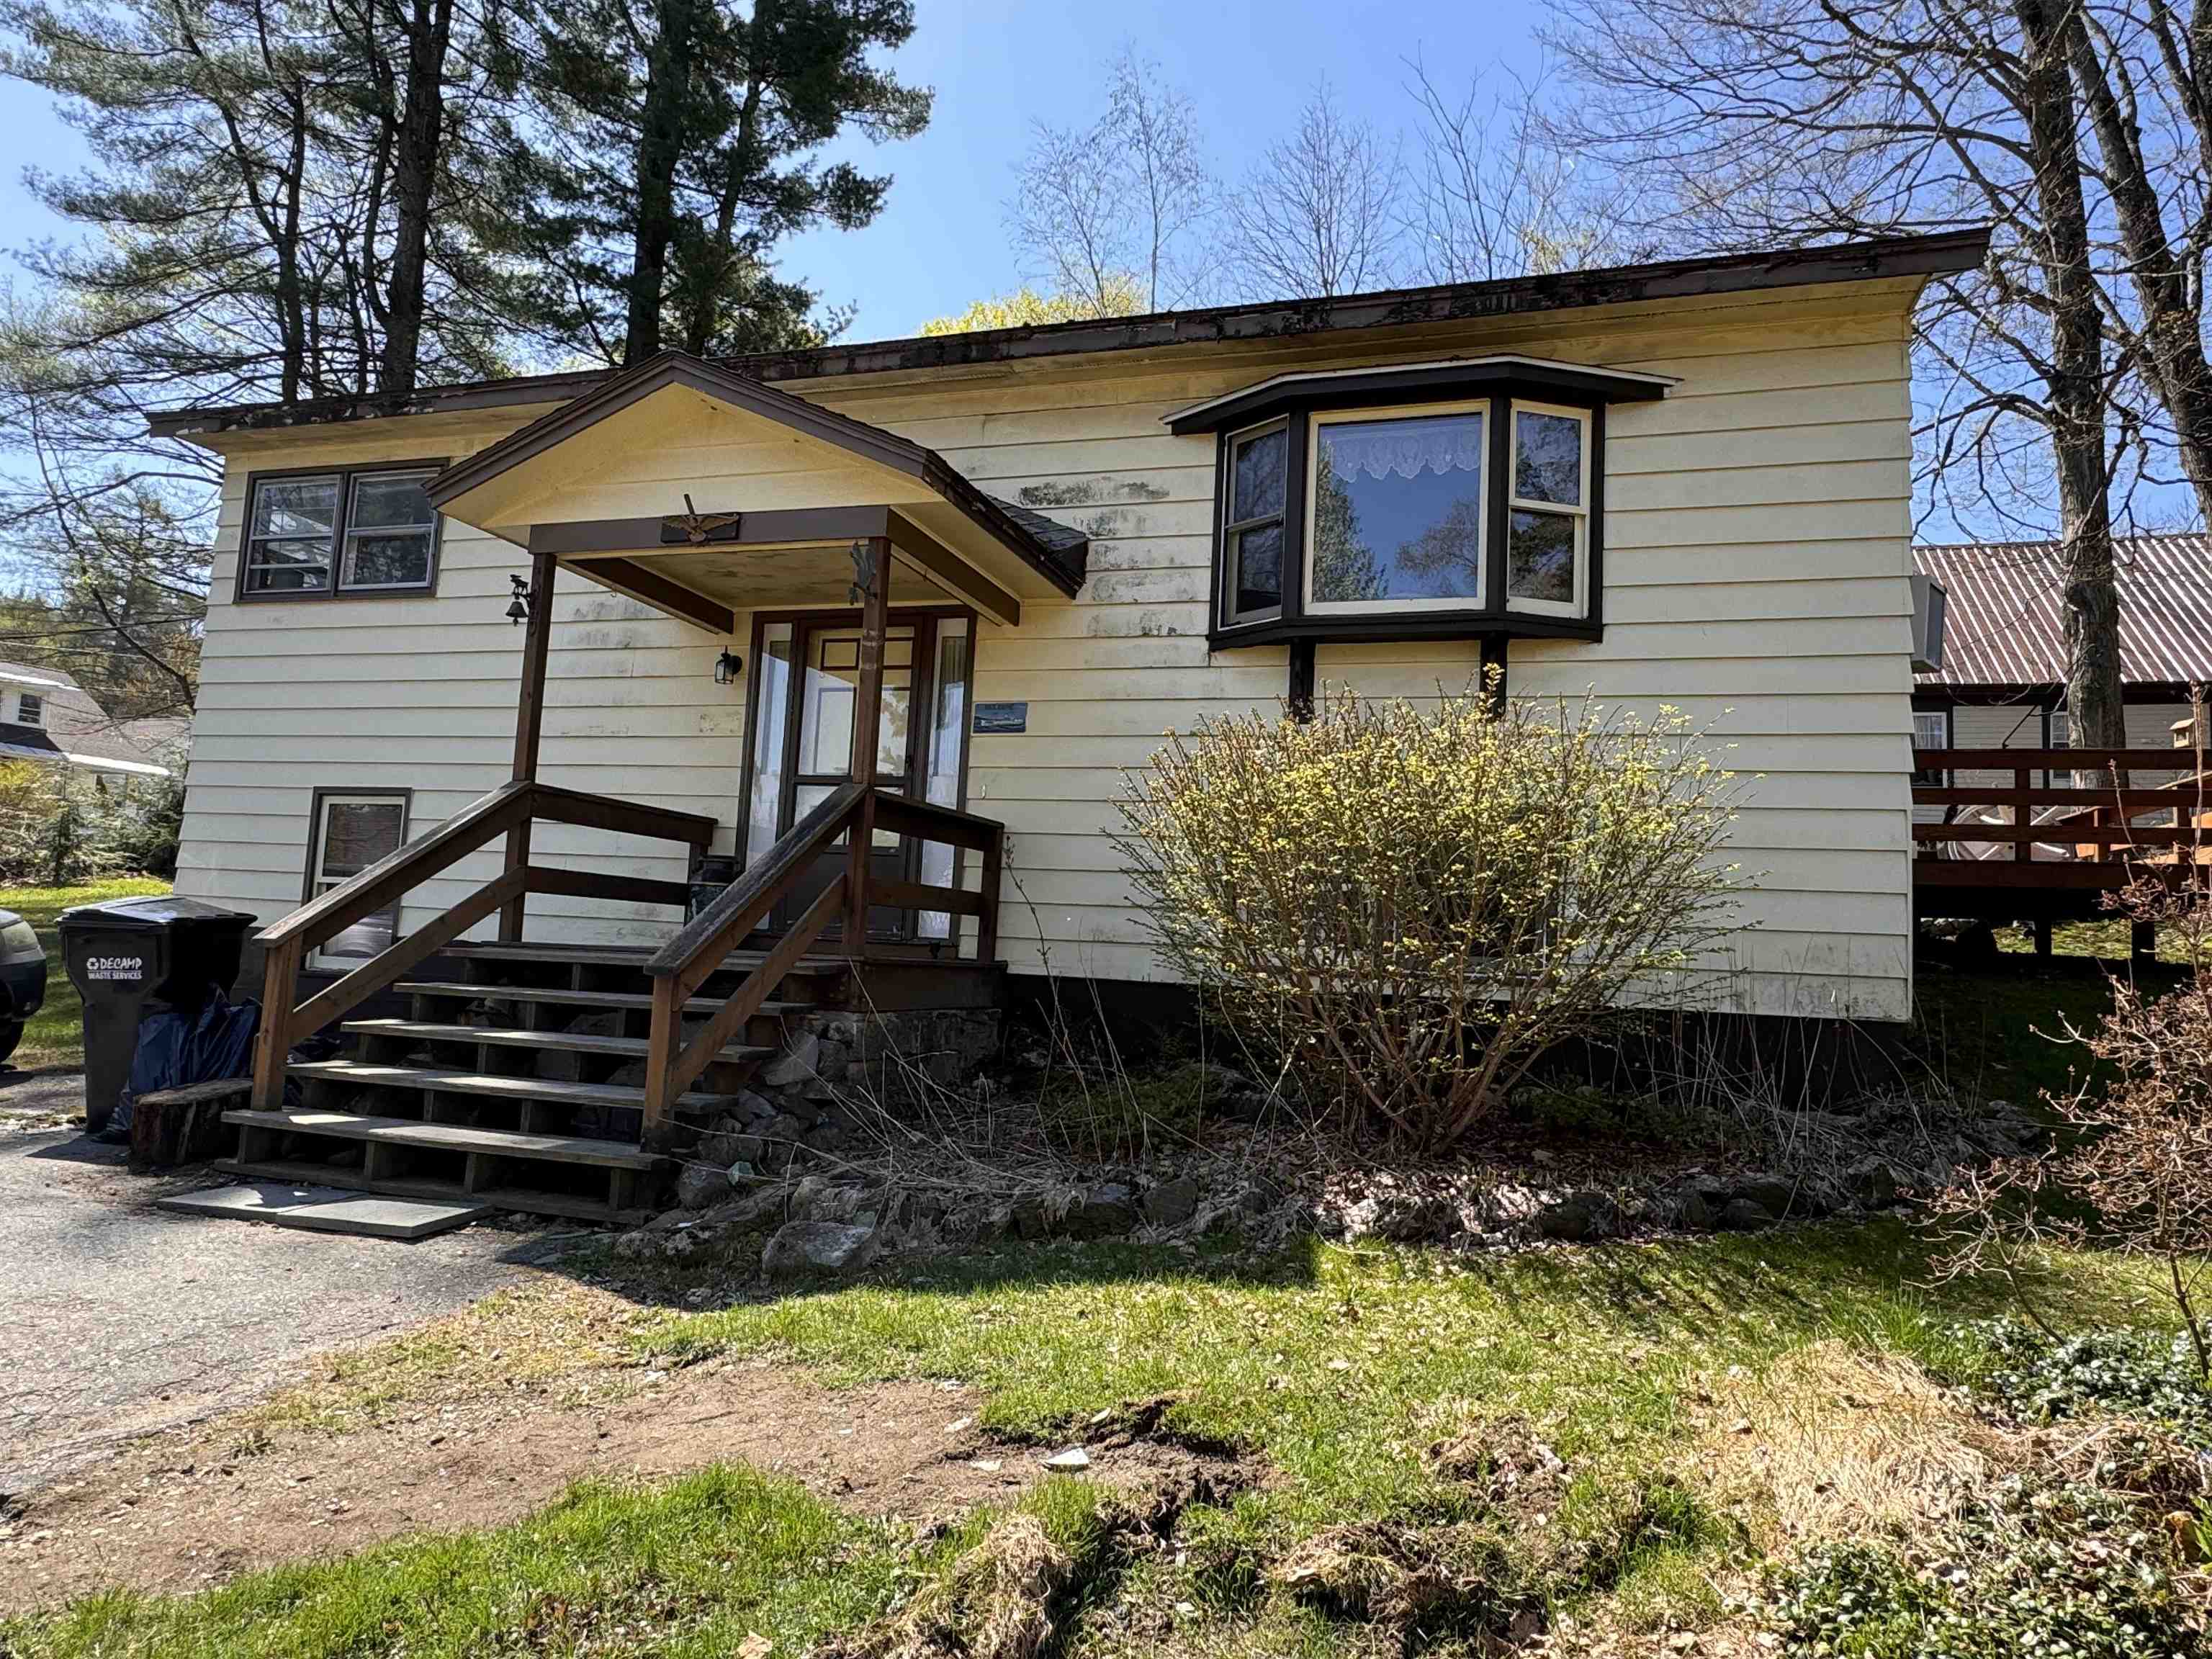 Claremont NH 03743 Home for sale $List Price is $257,700